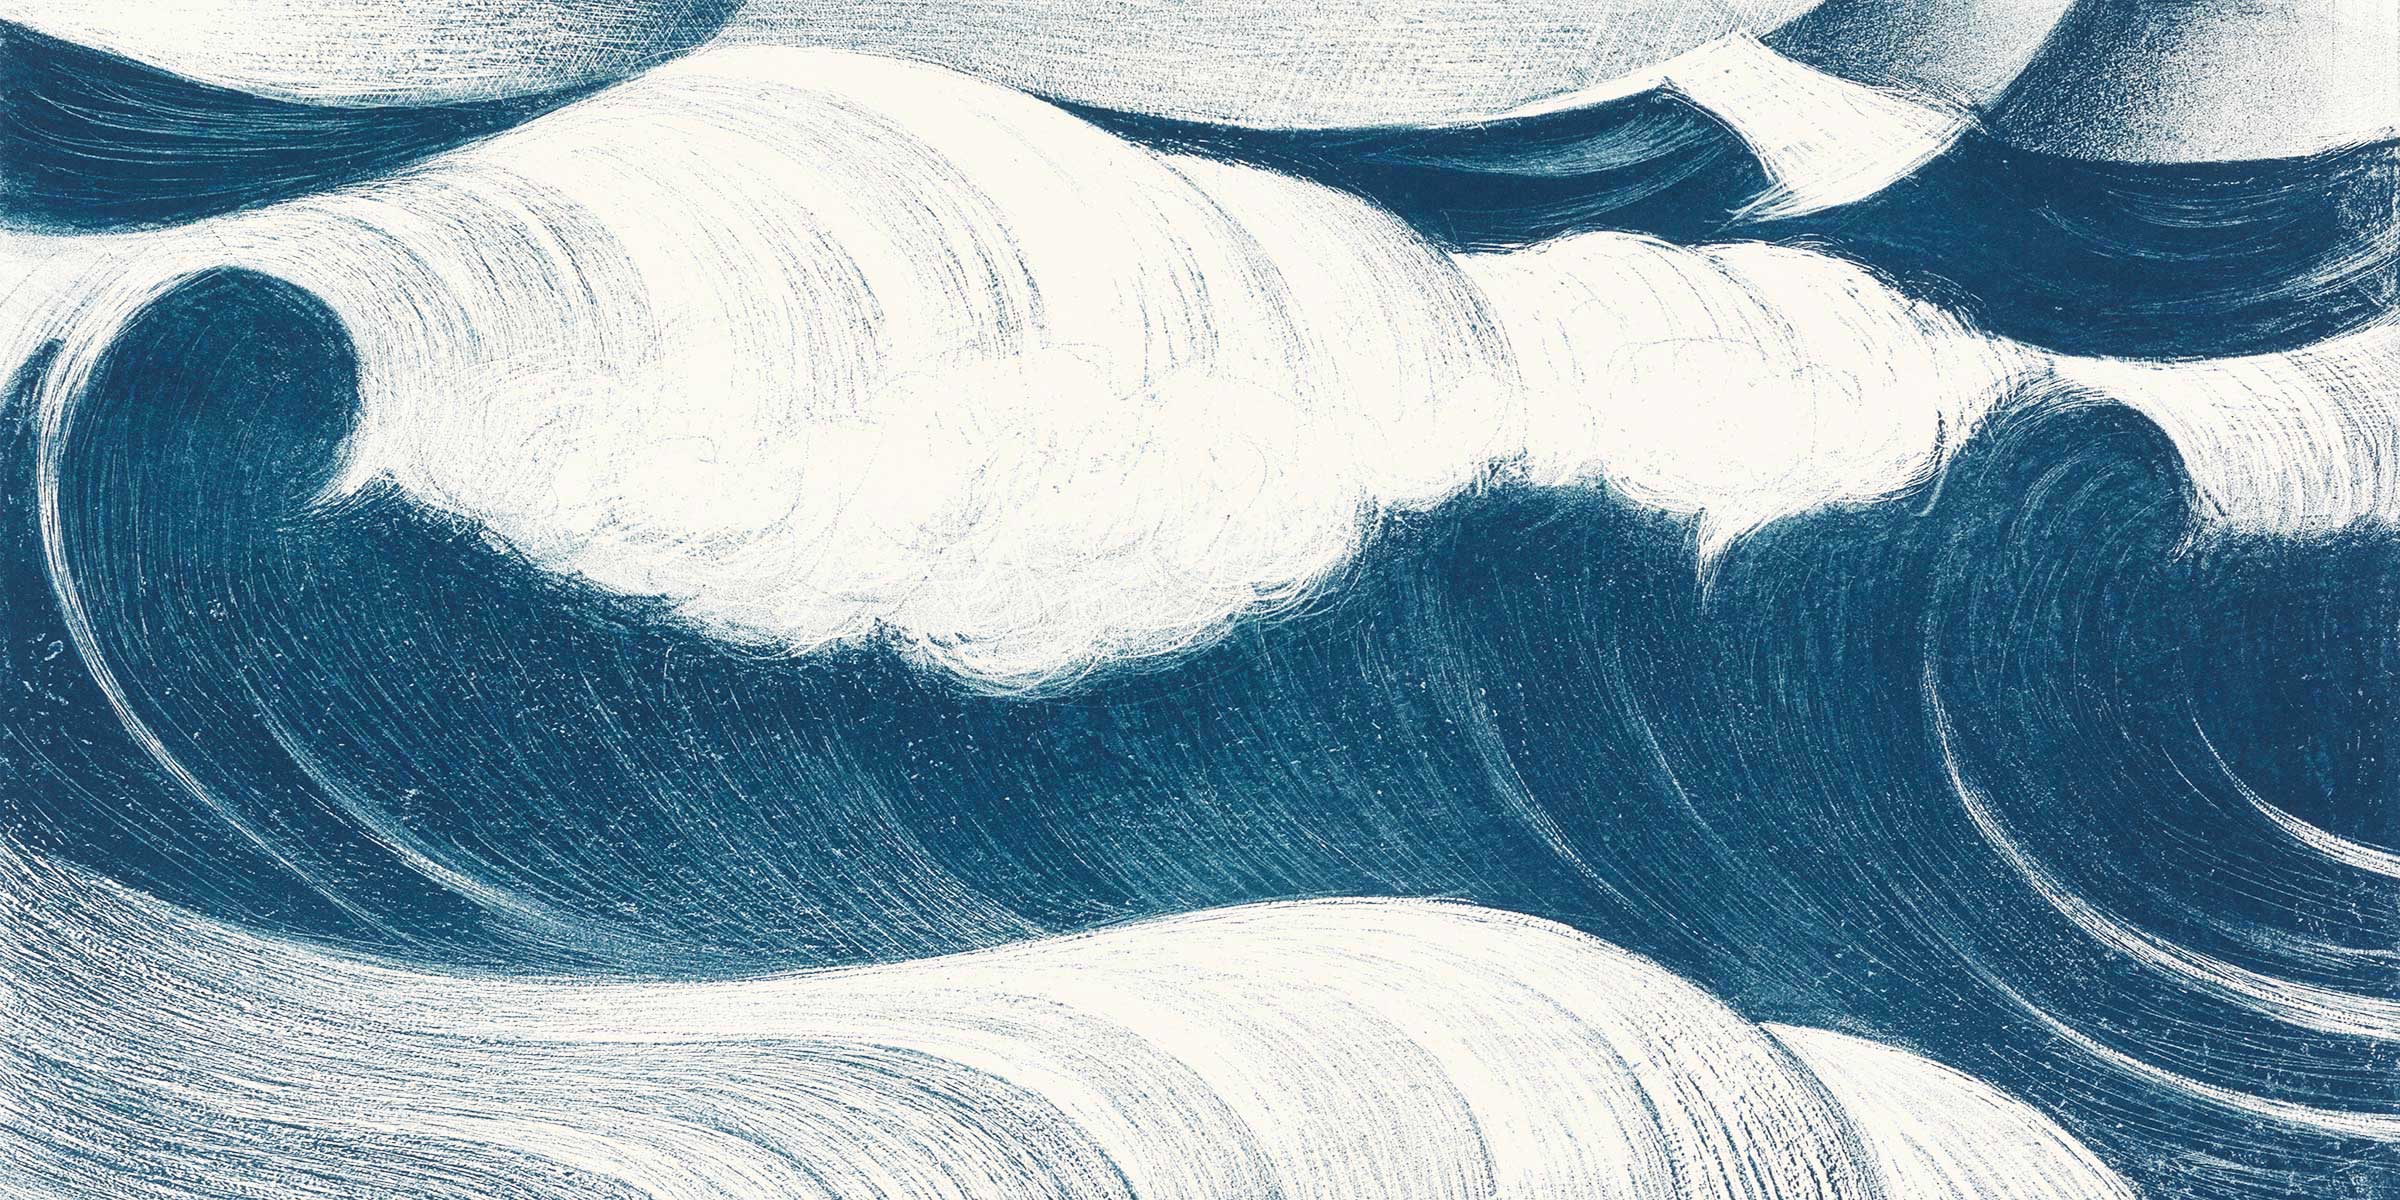 The Wave, by C.R.W. Nevinson, 1917.